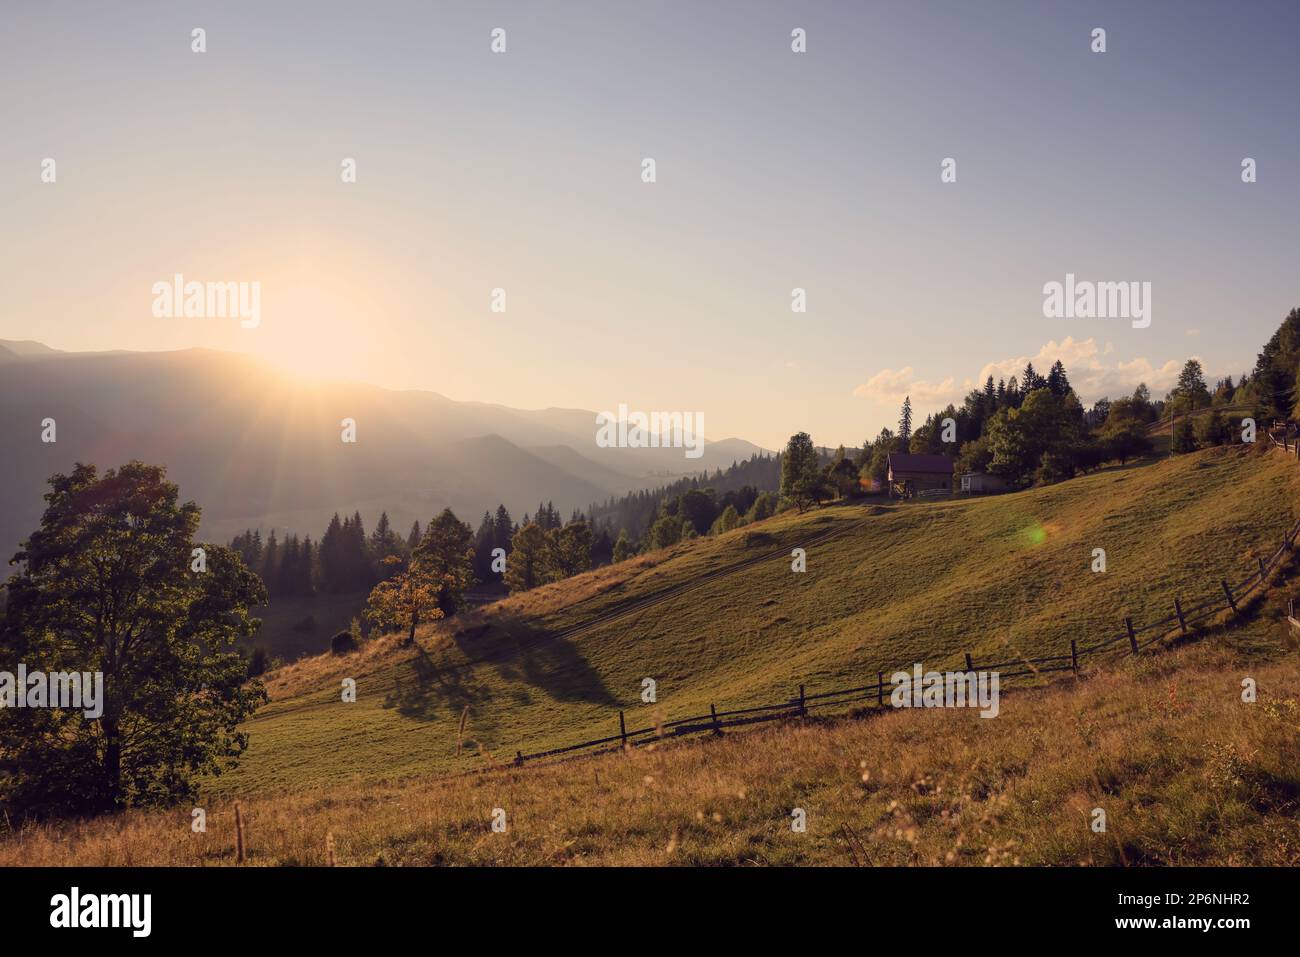 Morning sun shining over pasture in mountains Stock Photo